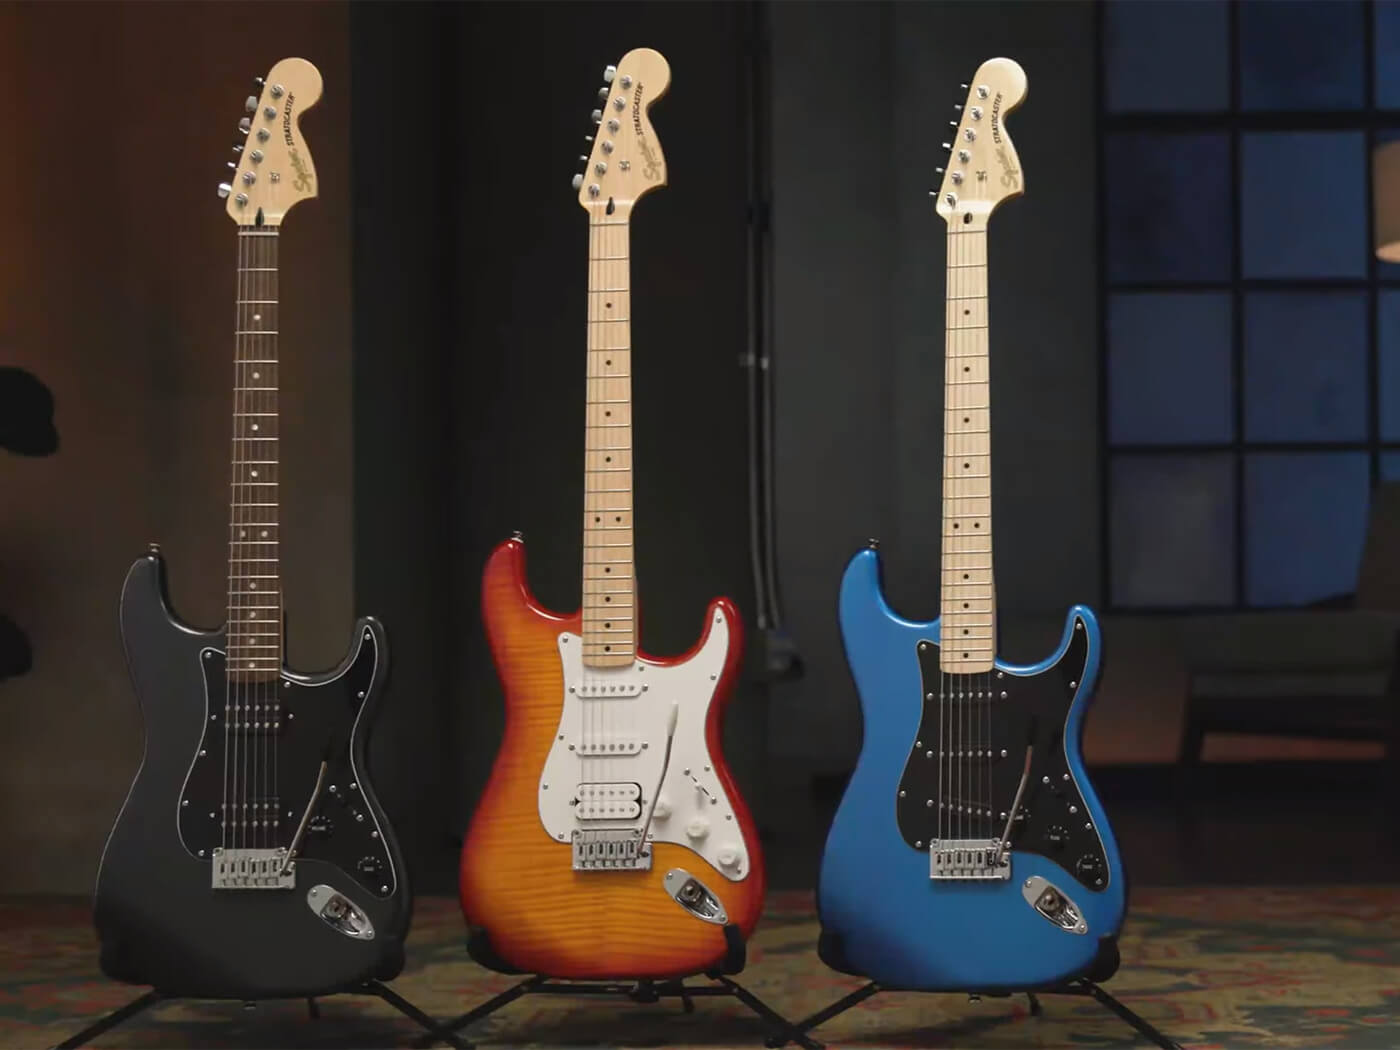 The new Squier Affinity Strats